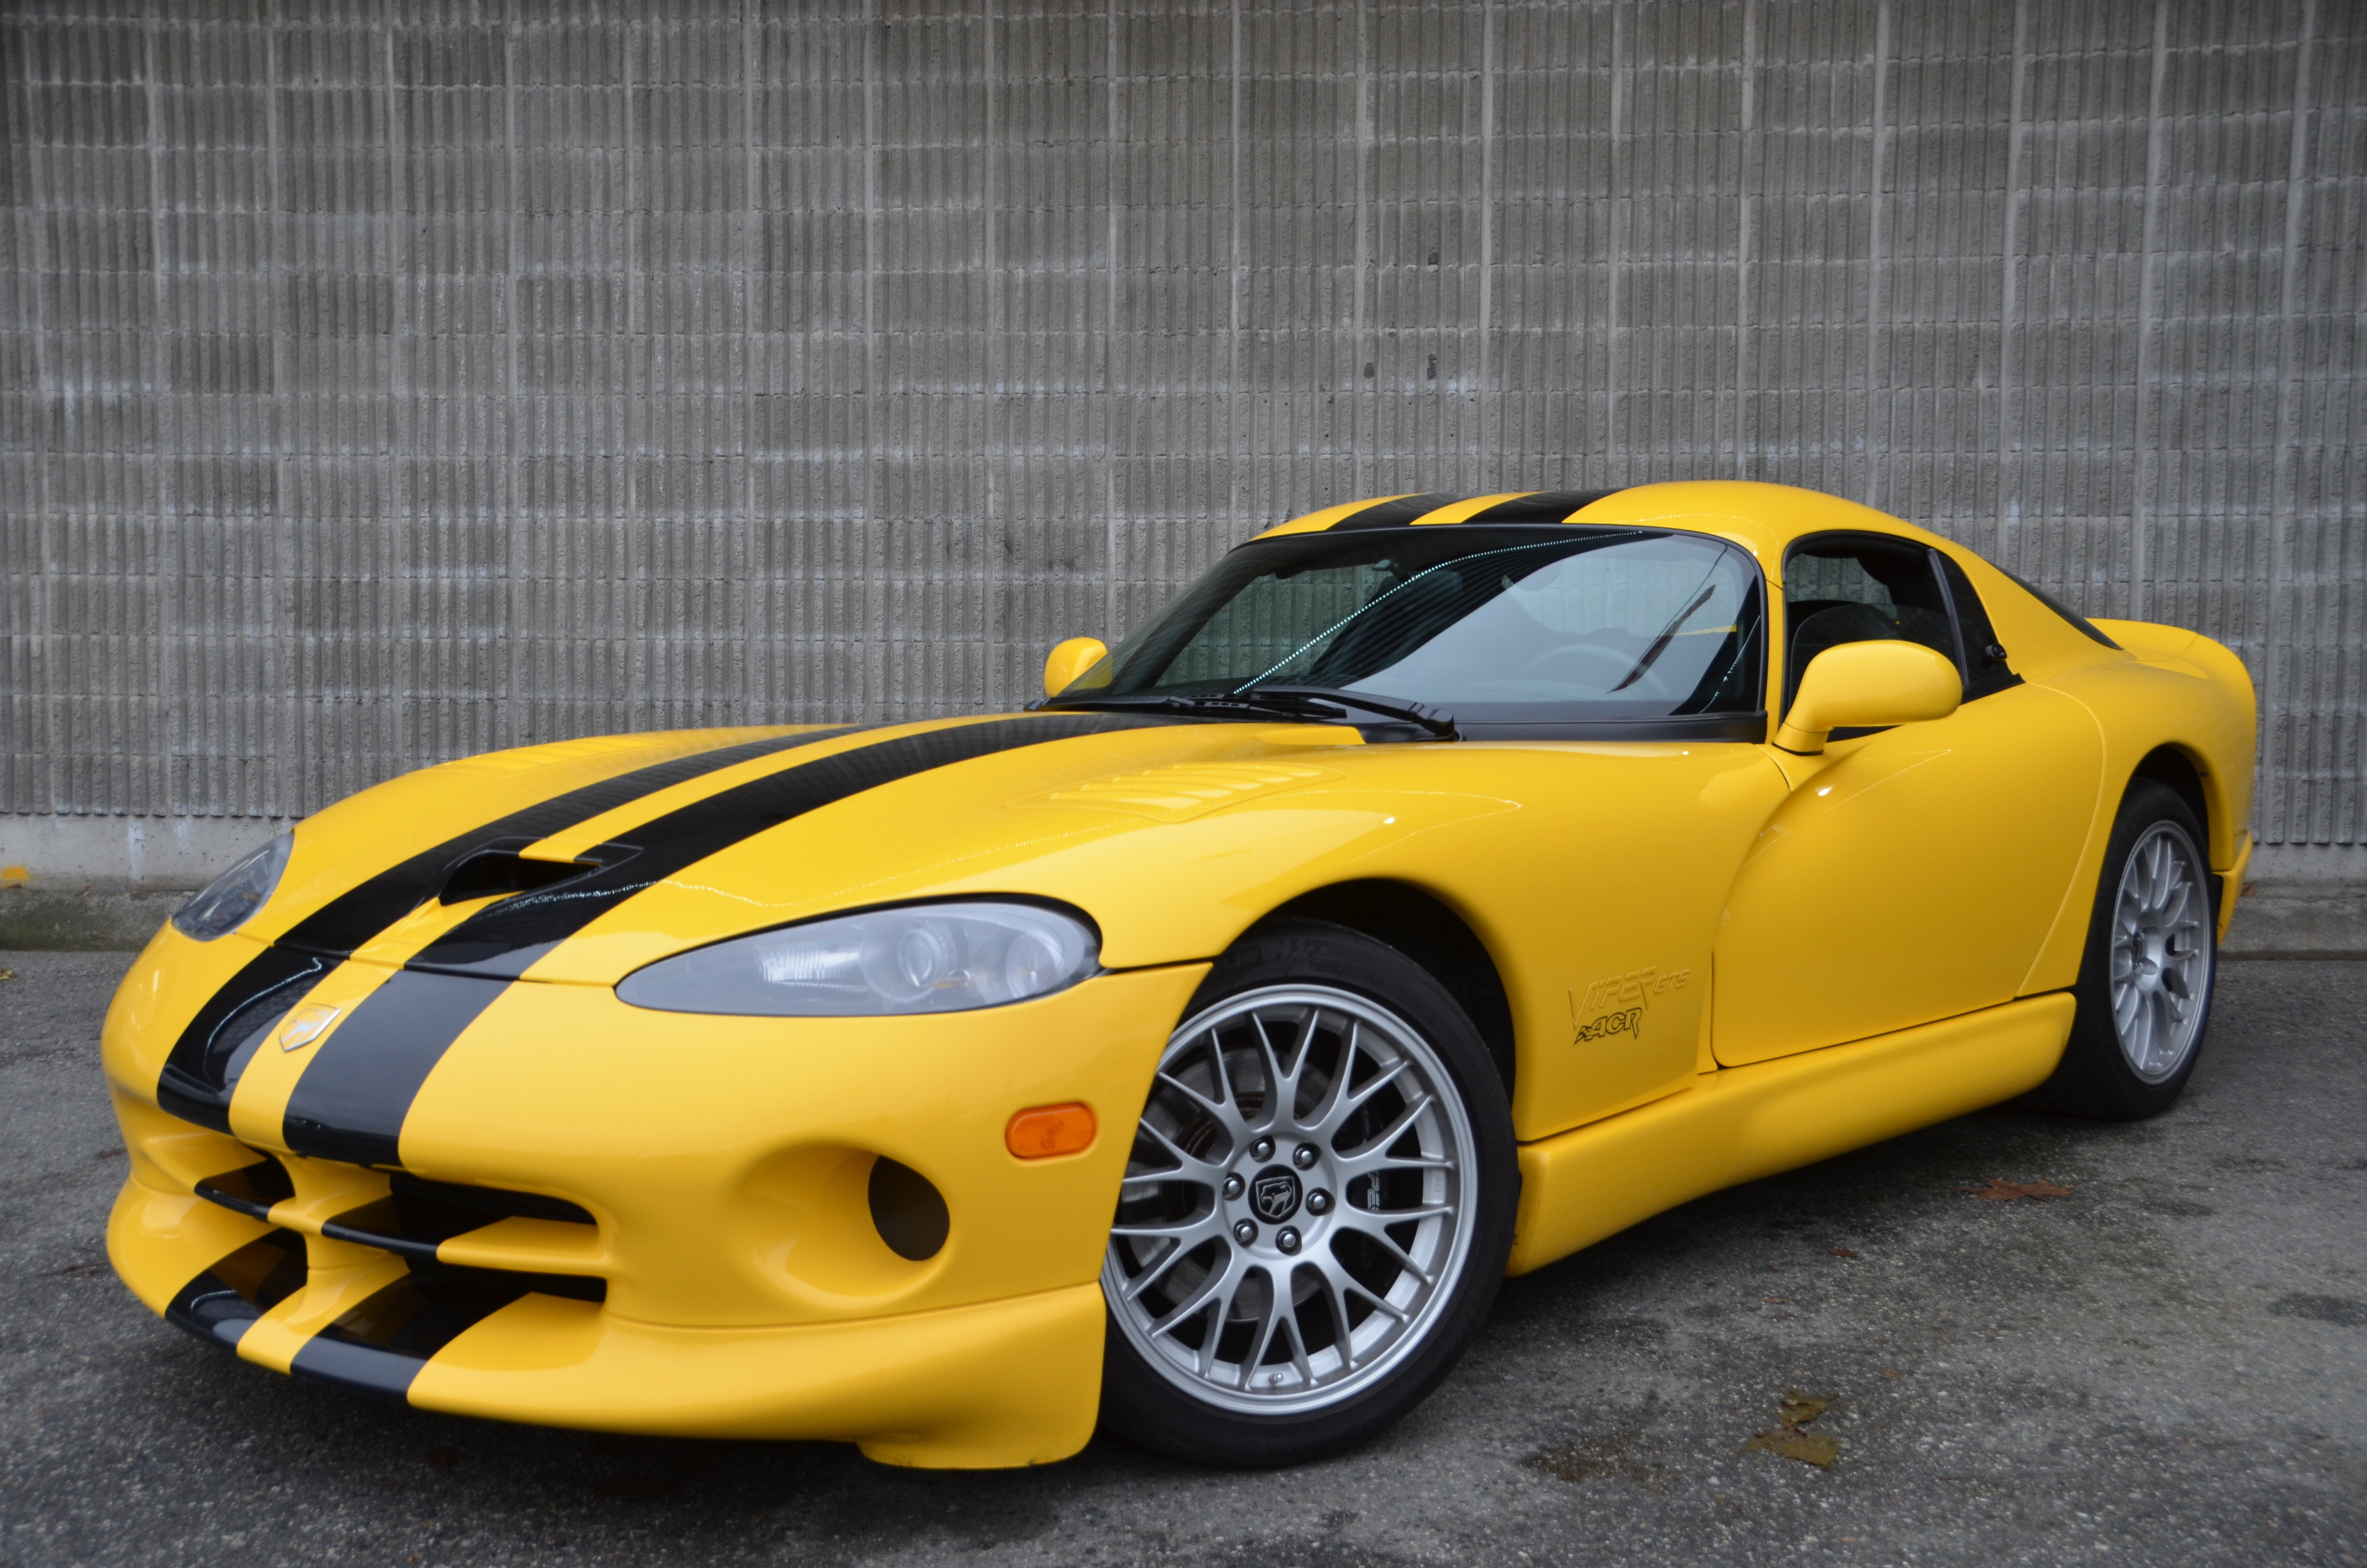 2001 Dodge Viper GTS ACR Competition 1 of 89